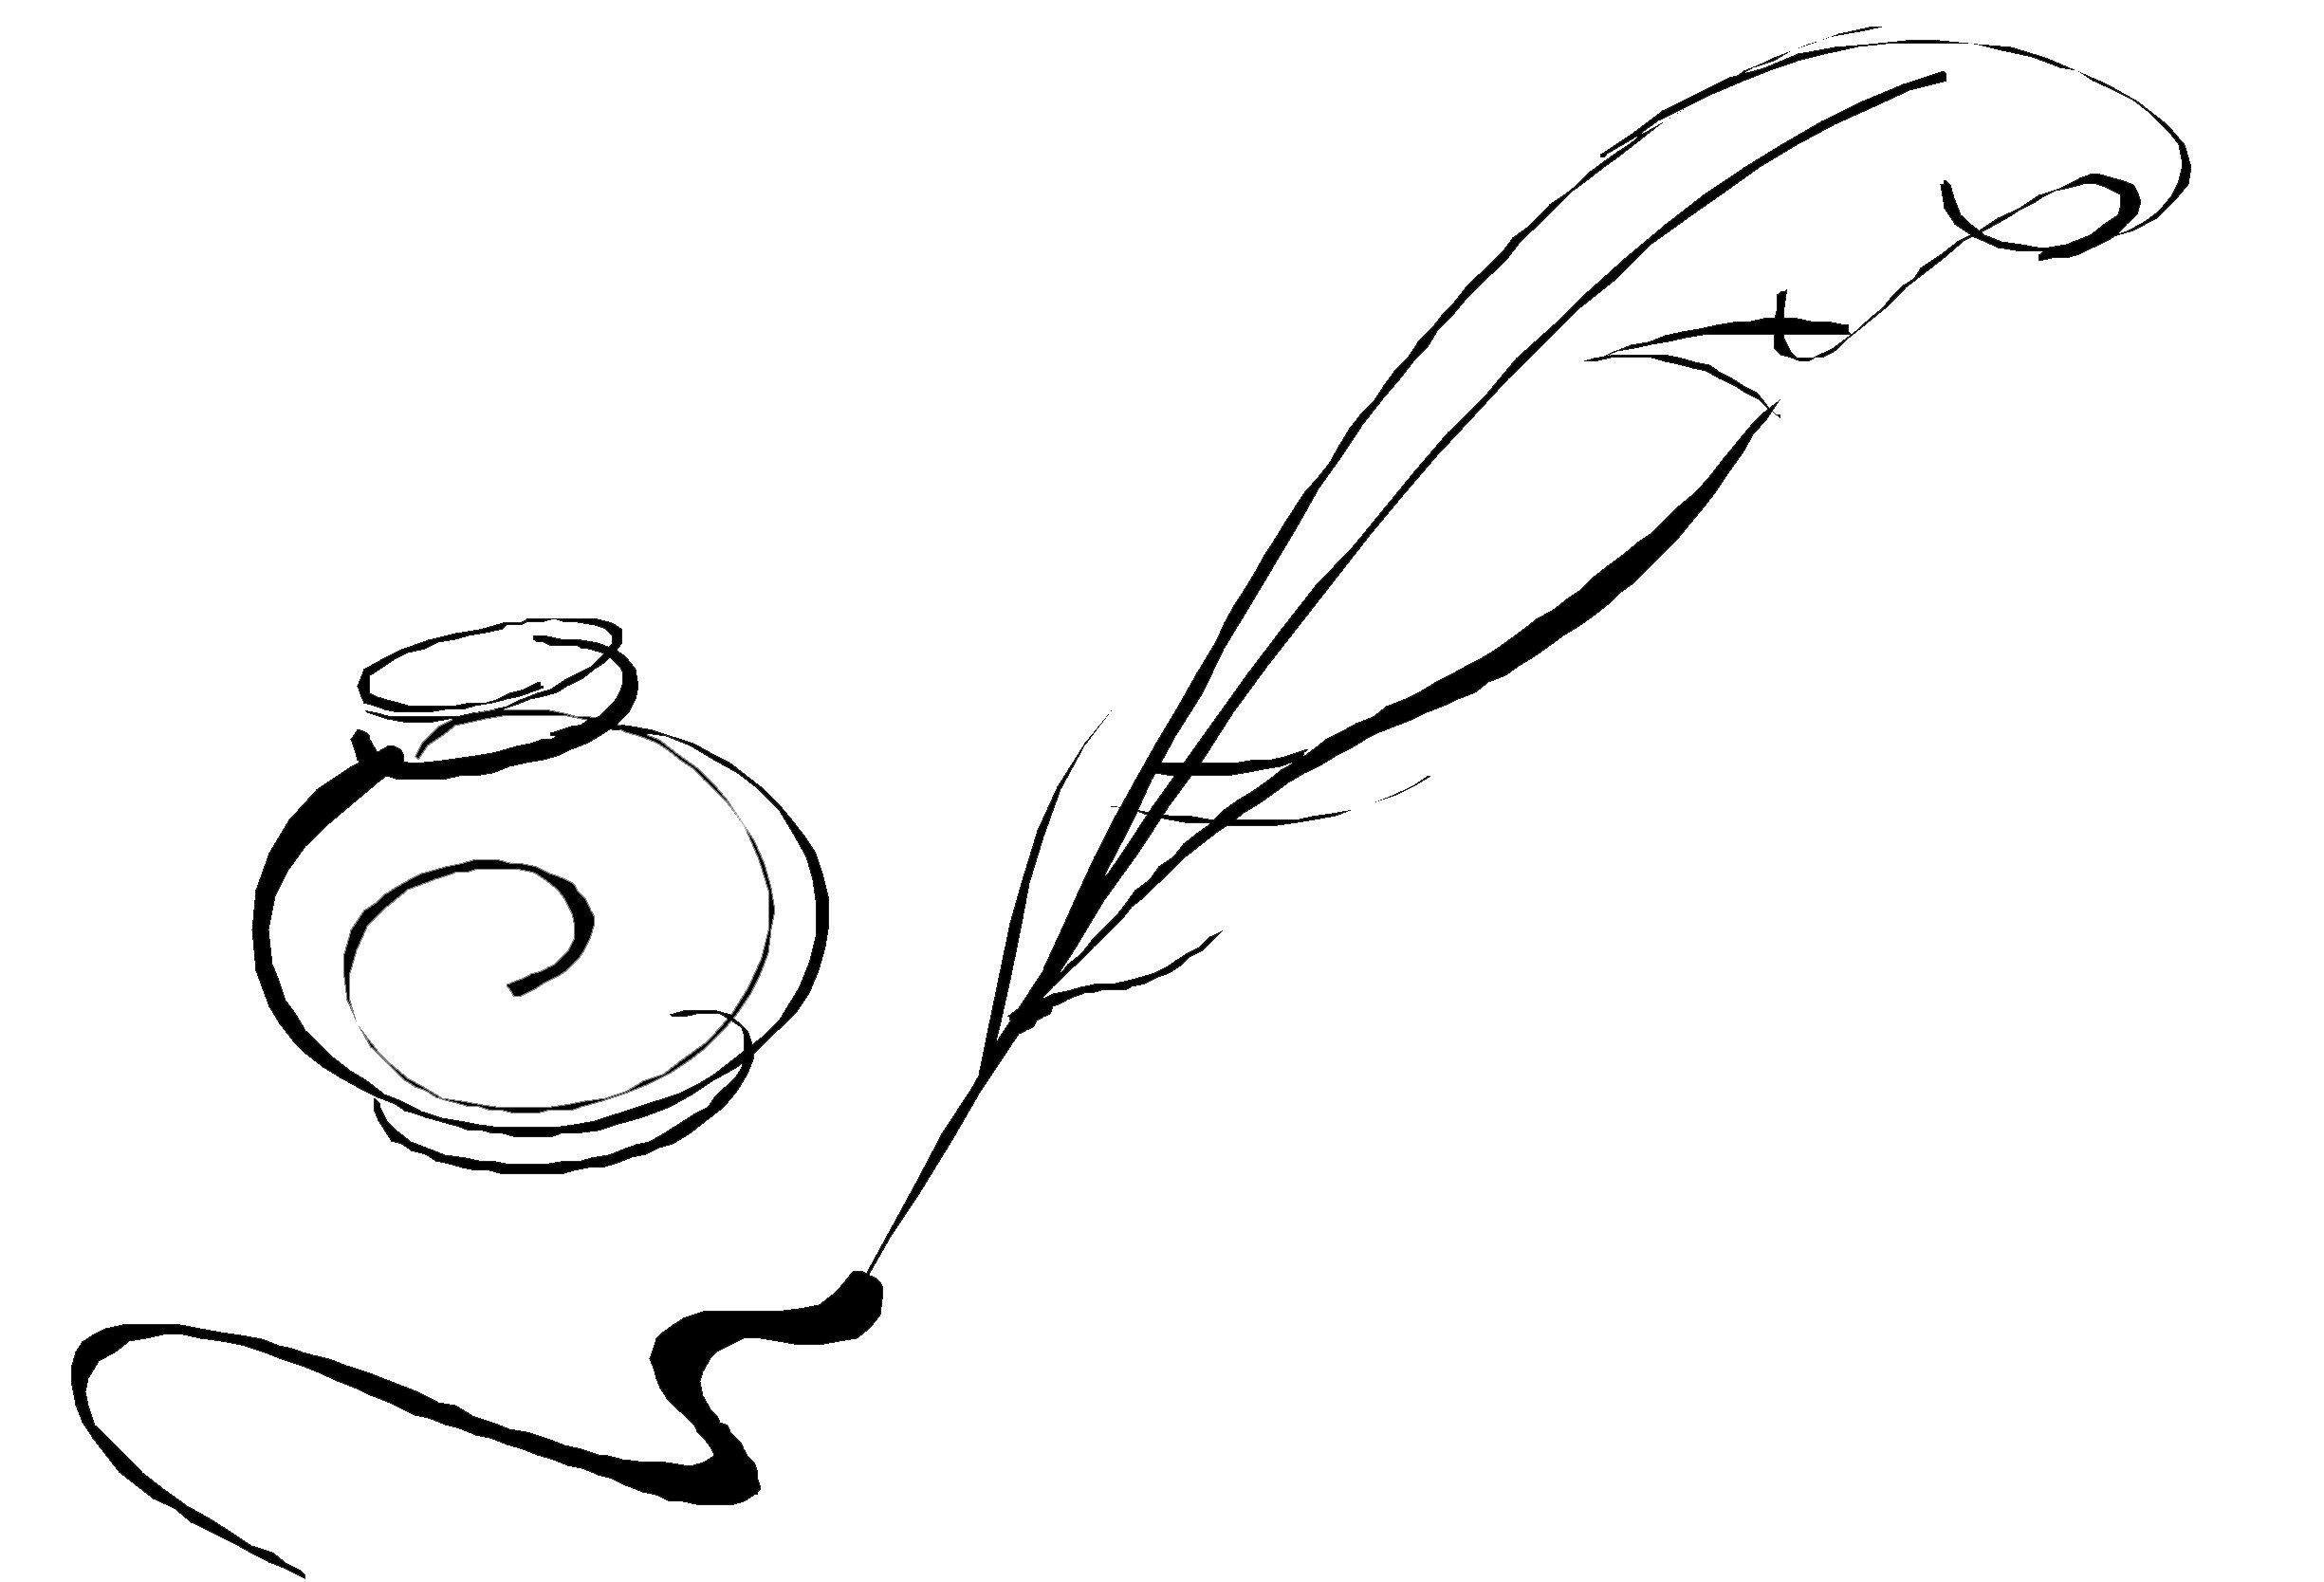 Quill Scroll Logo - Free Quill Pen Picture, Download Free Clip Art, Free Clip Art